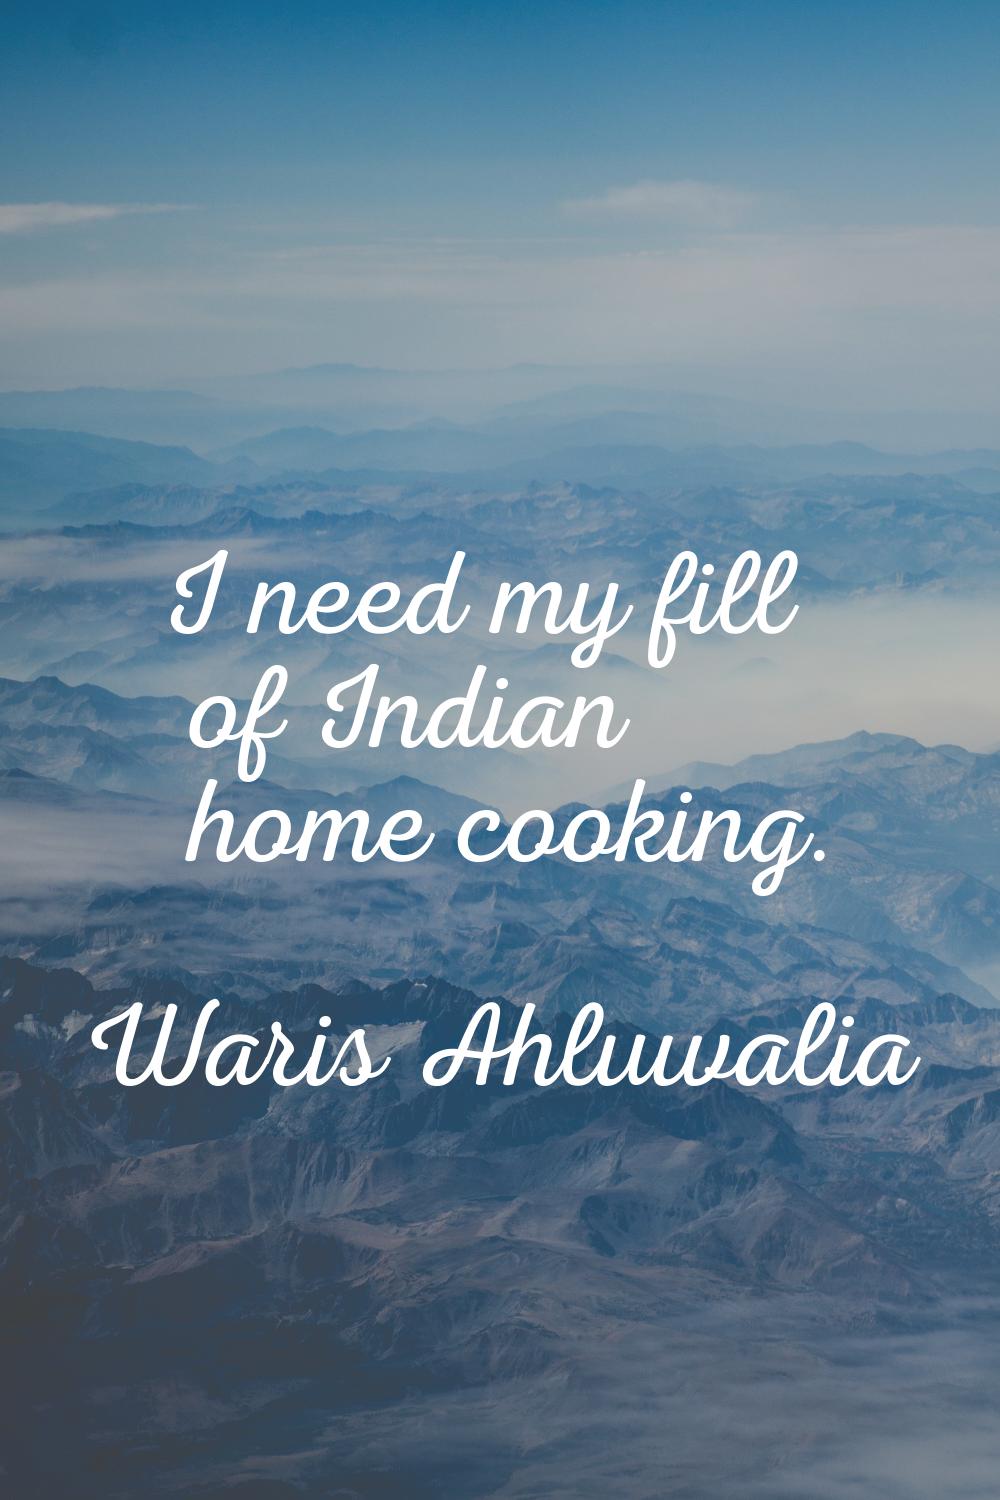 I need my fill of Indian home cooking.